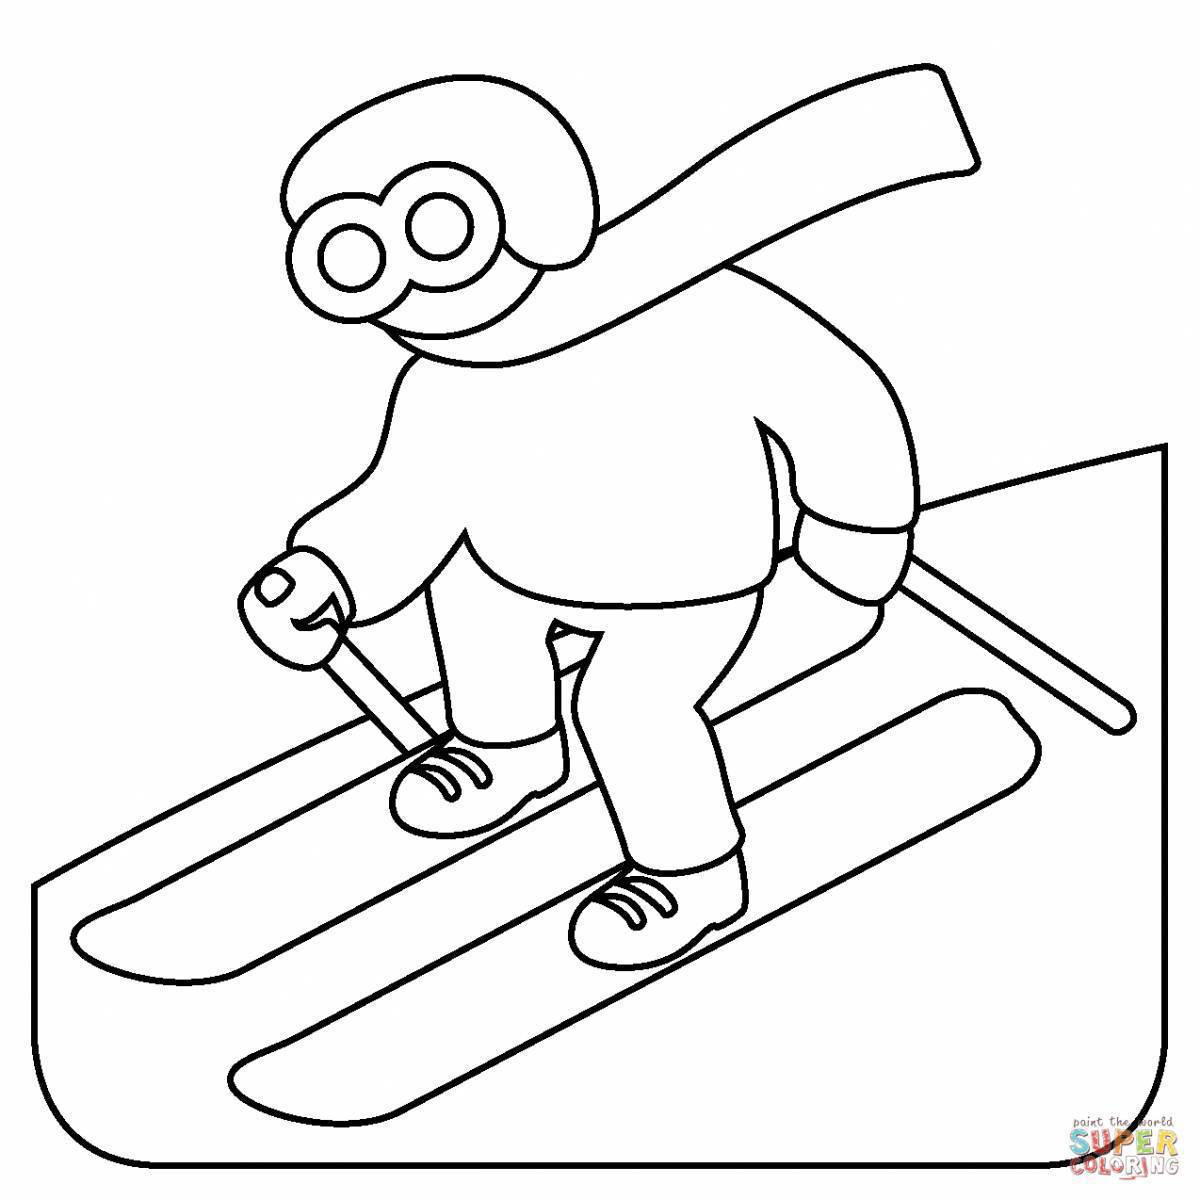 Coloring book bright skier